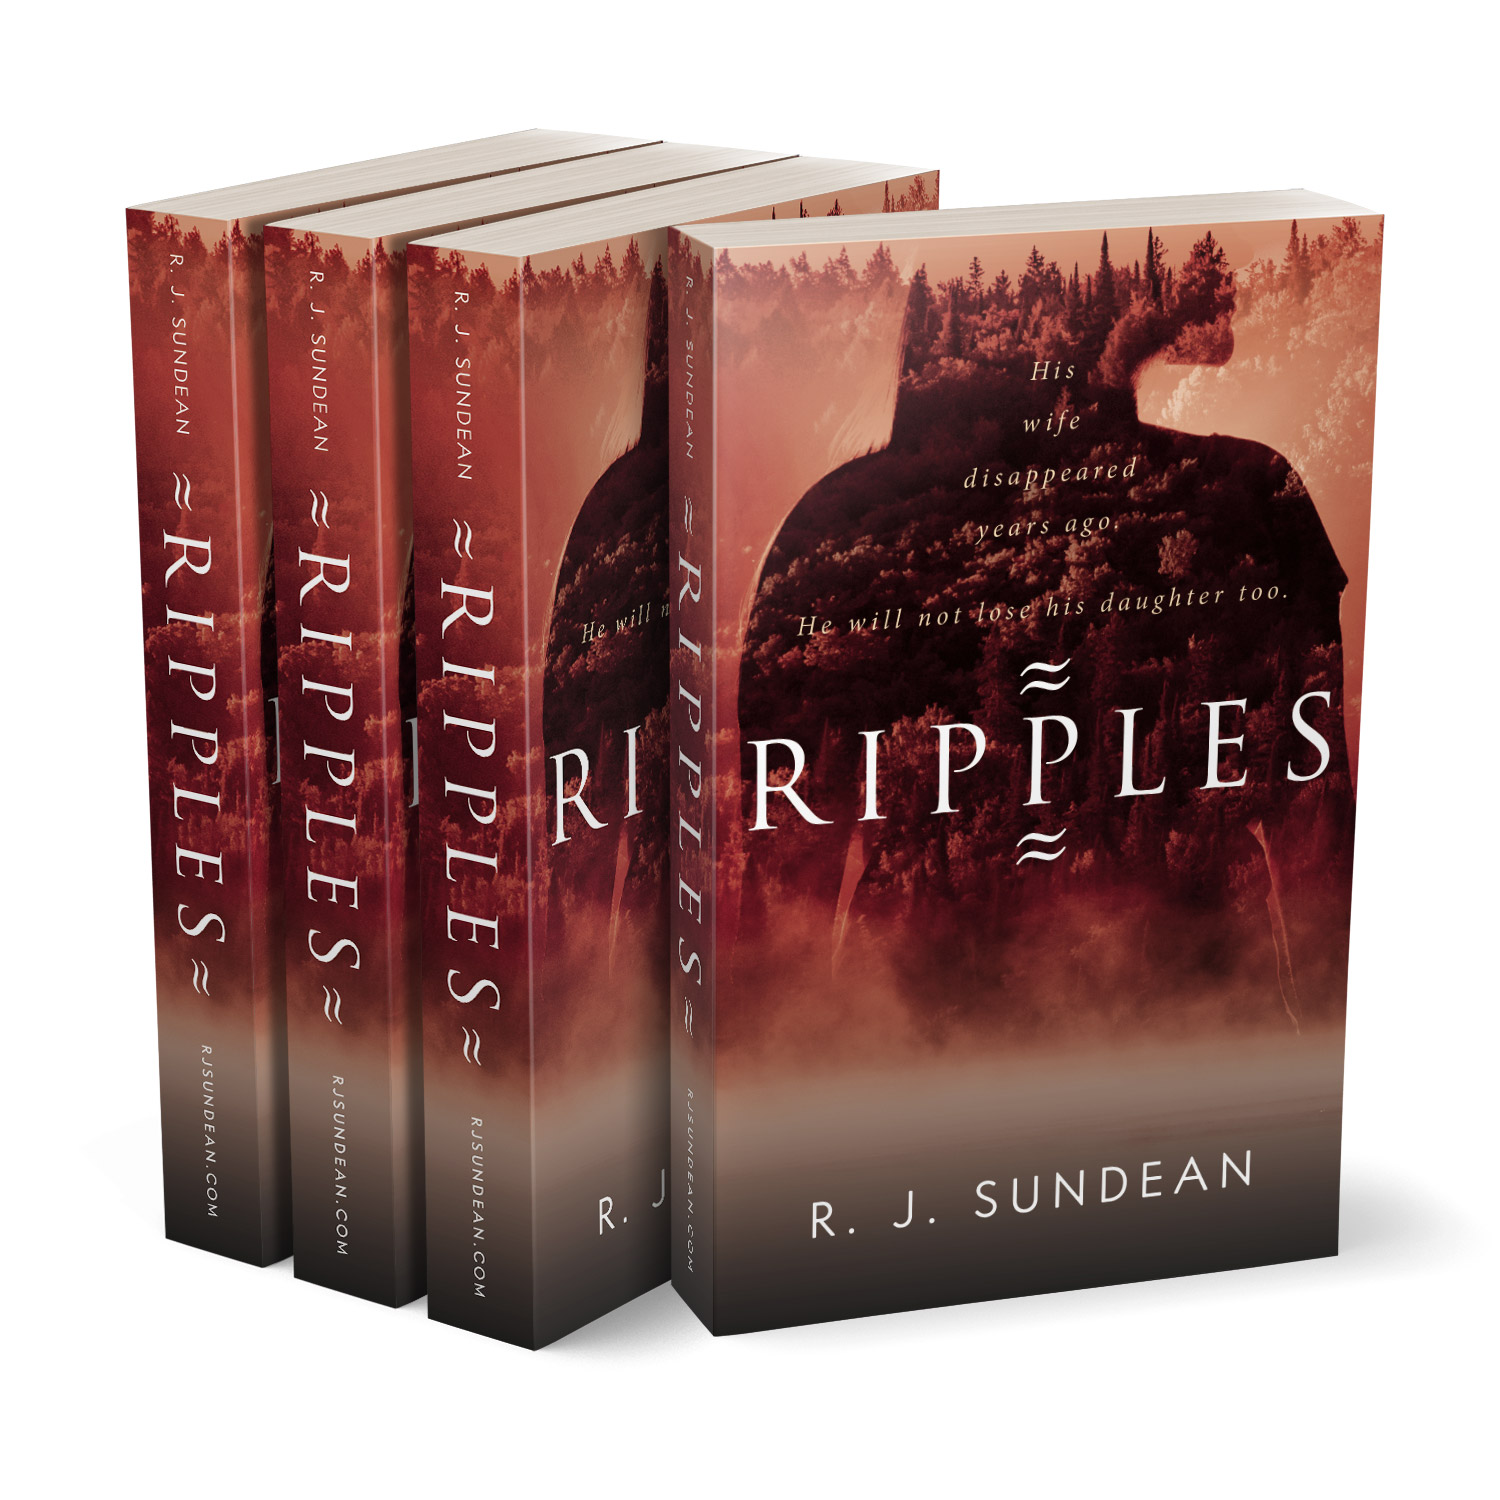 'Ripples' is an atmospheric threat thriller. The author is RJ Sundean. The cover and interior design of the book are by Mark Thomas. To learn more about what Mark could do for your book, please visit coverness.com.